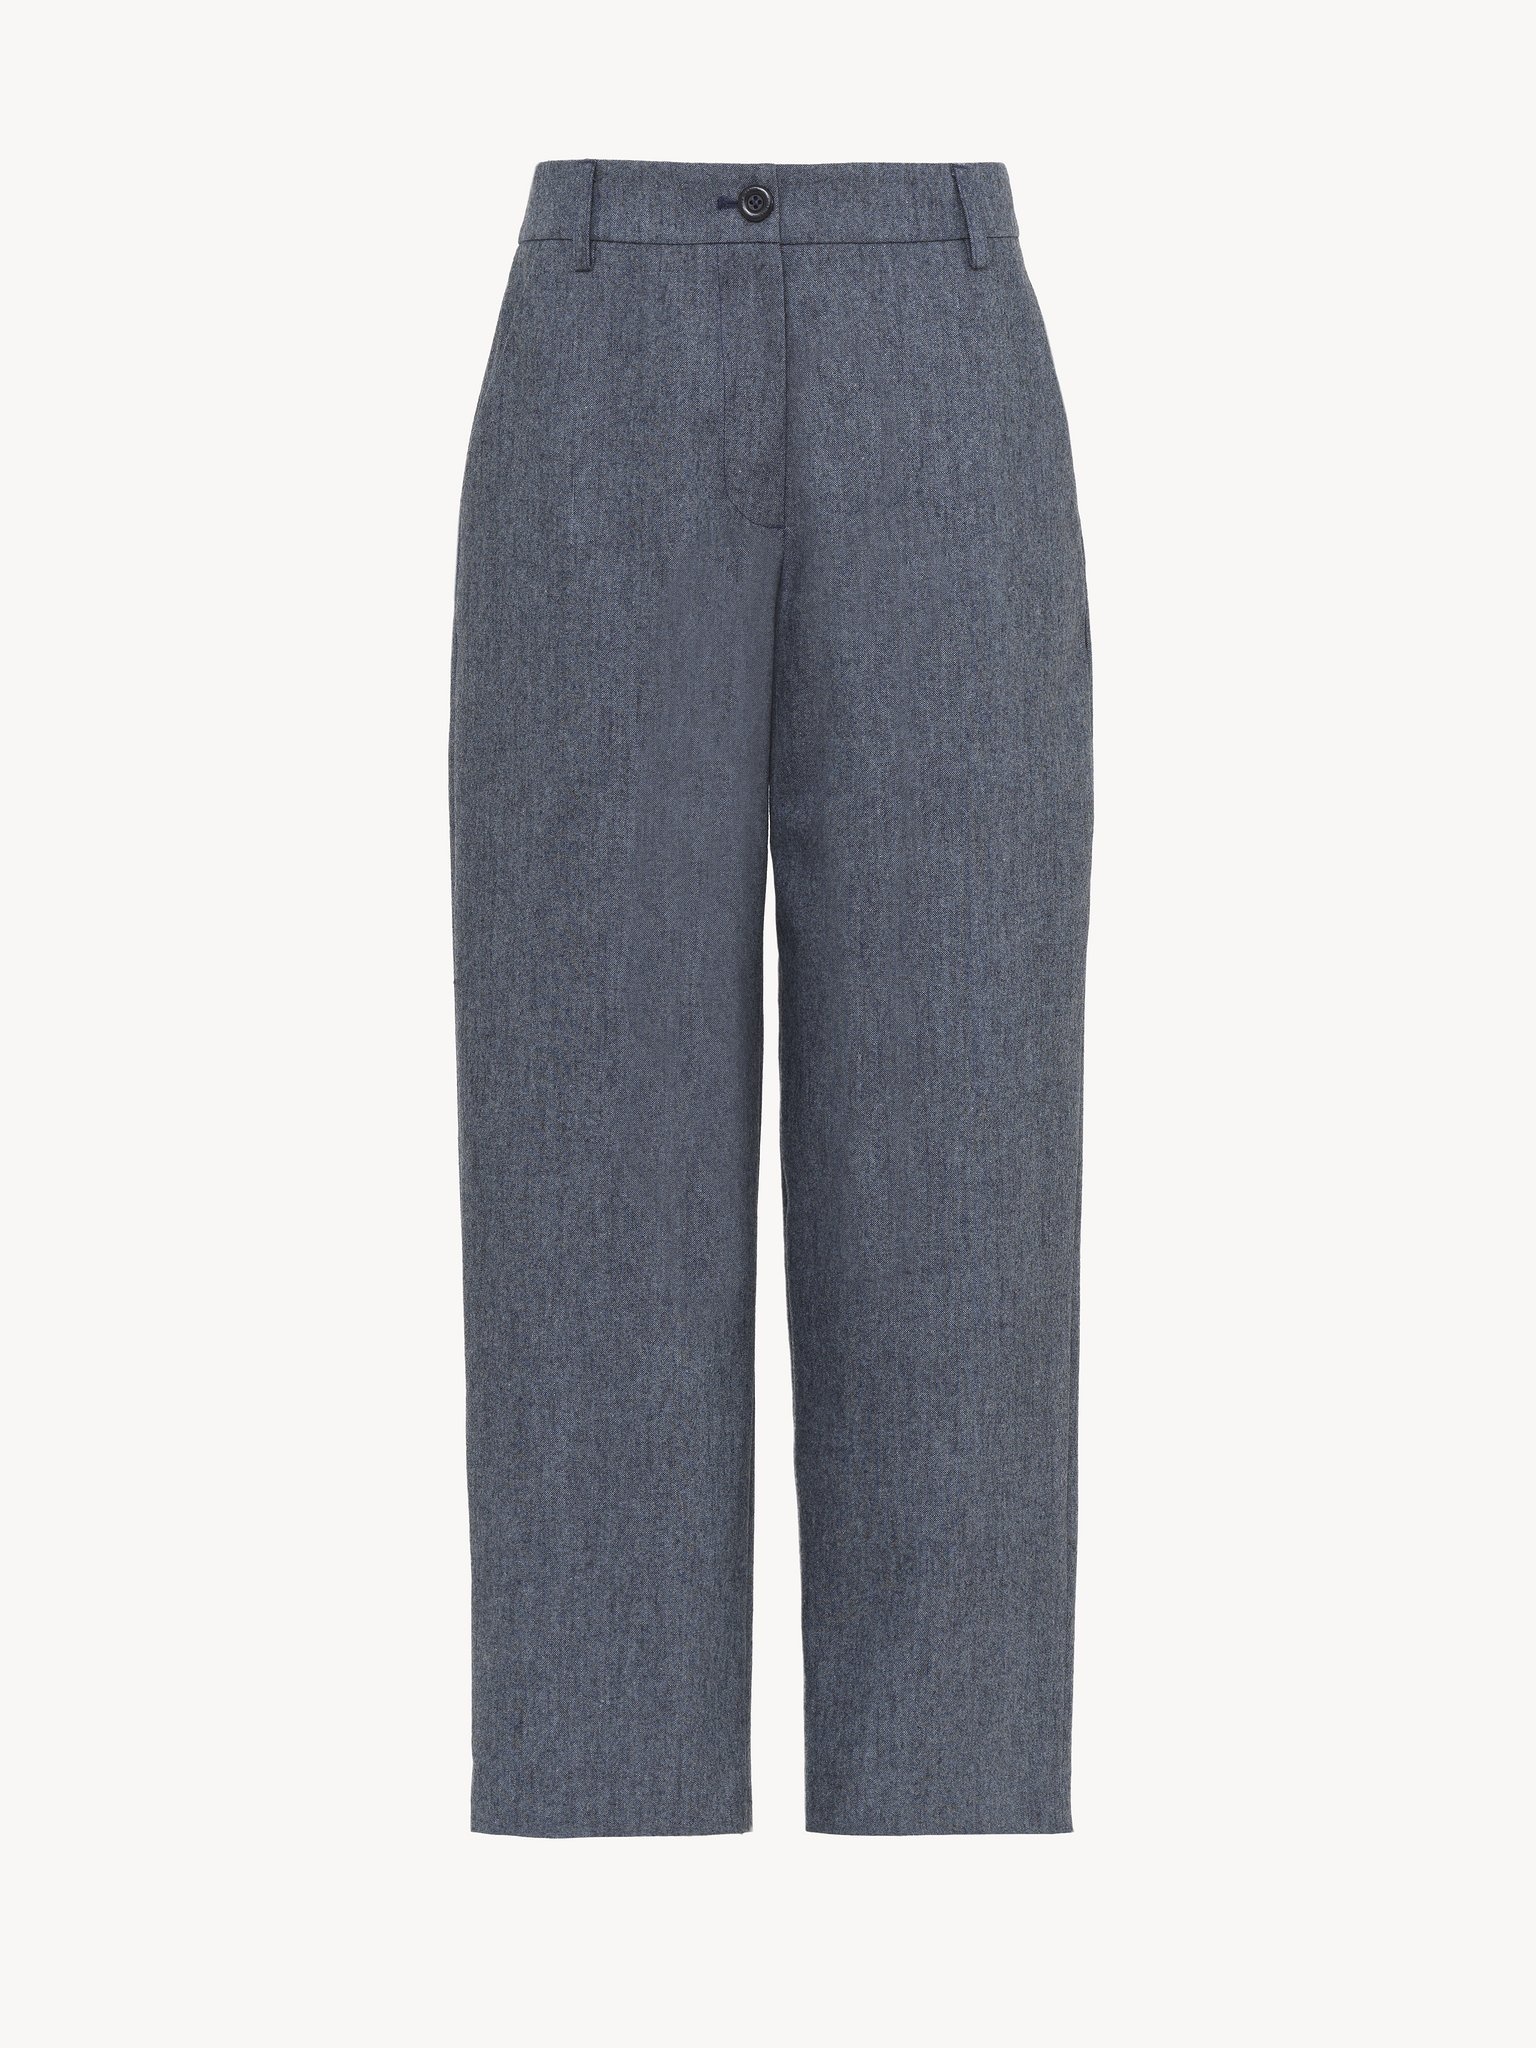 TAPERED PANTS - 4